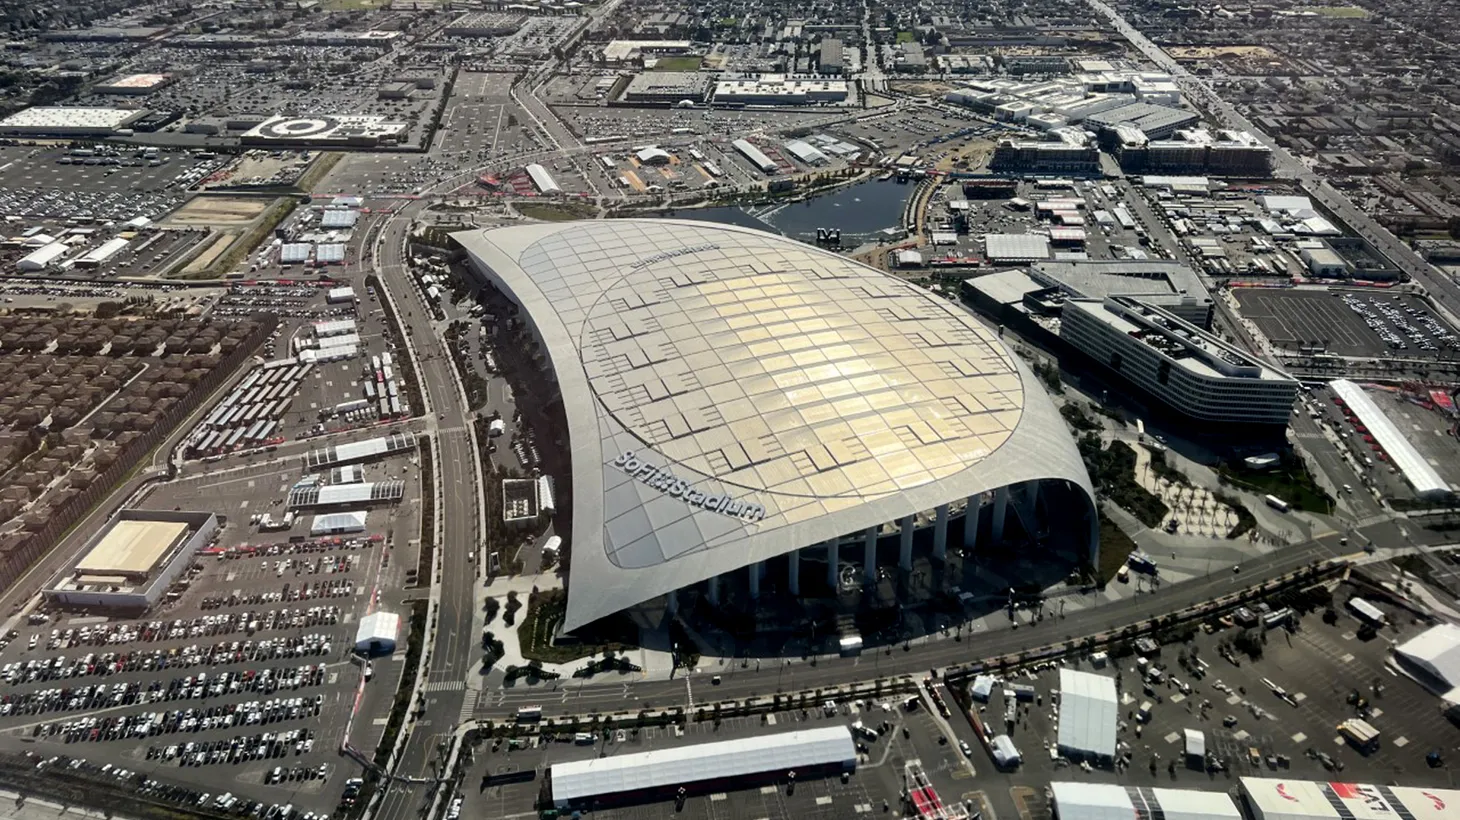 An aerial view shows SoFi Stadium in Inglewood, Feb 8, 2022.